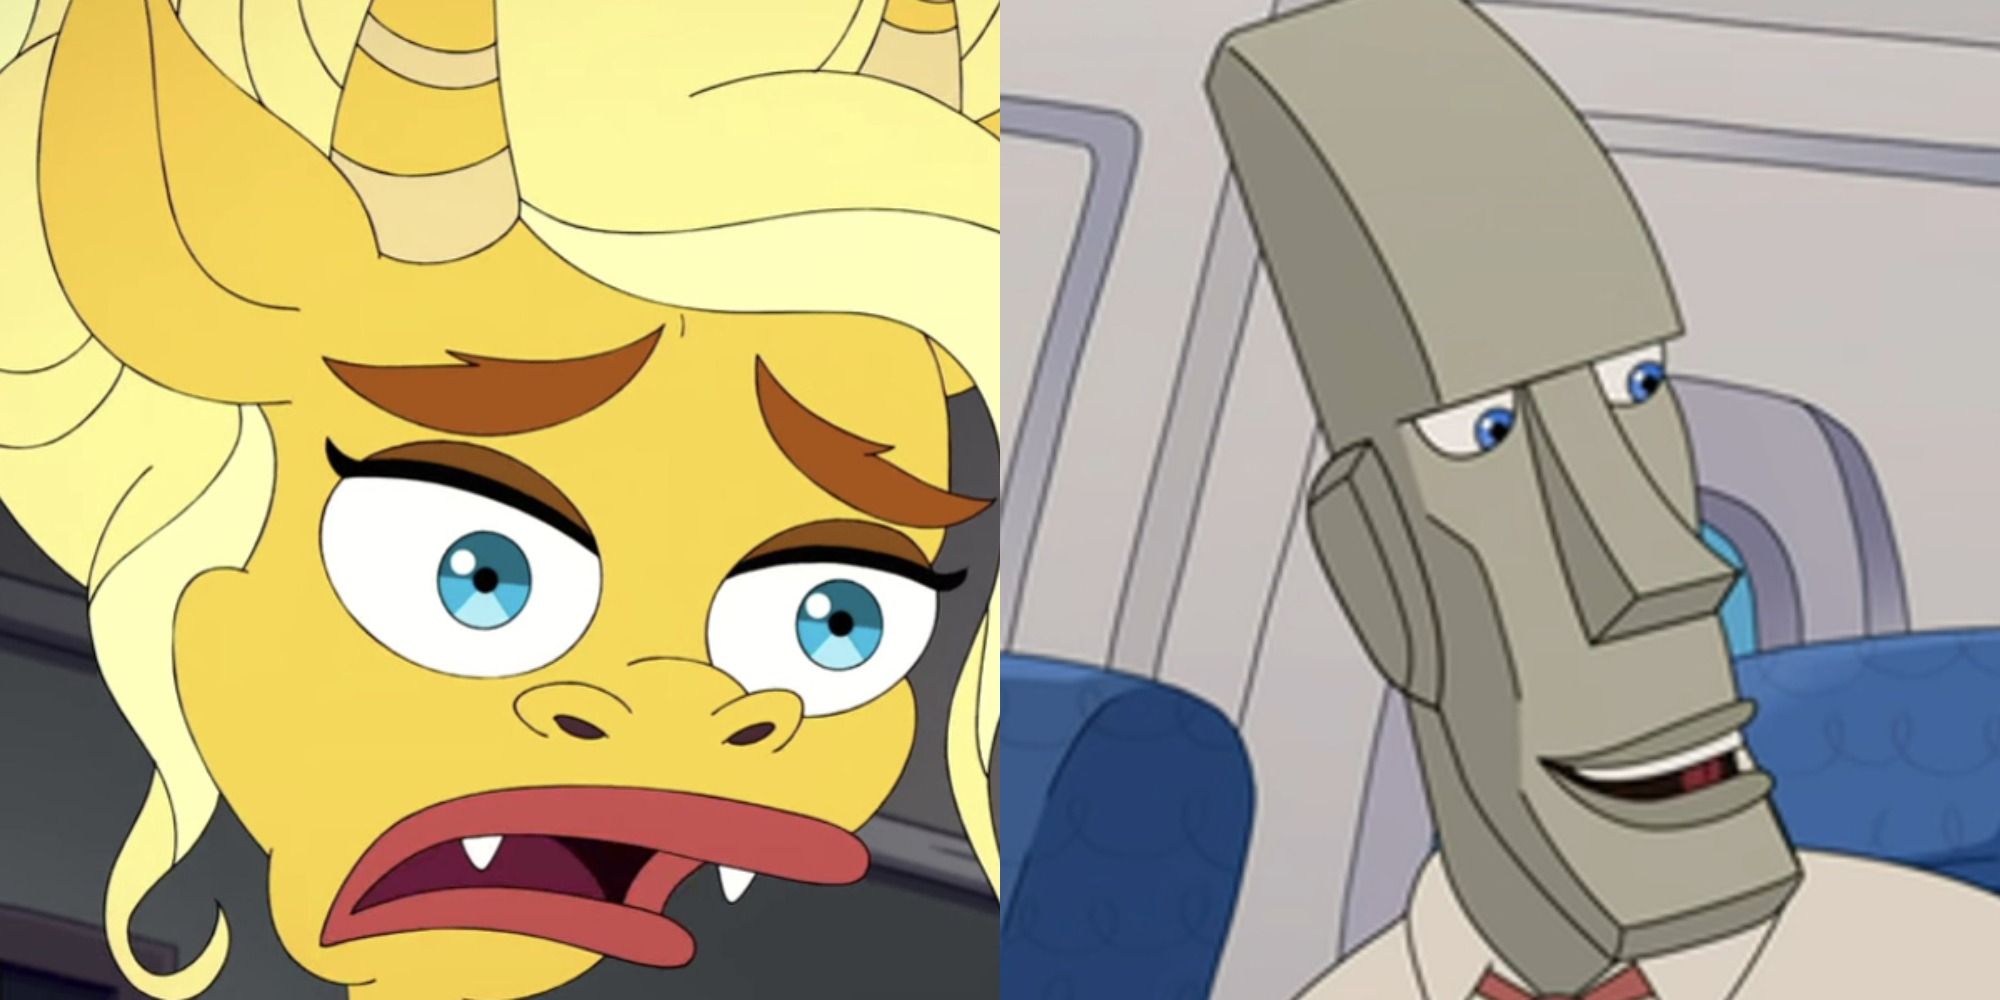 Split image of Connie the HormoneMonster and Pete the Logic Rock from Human Resources